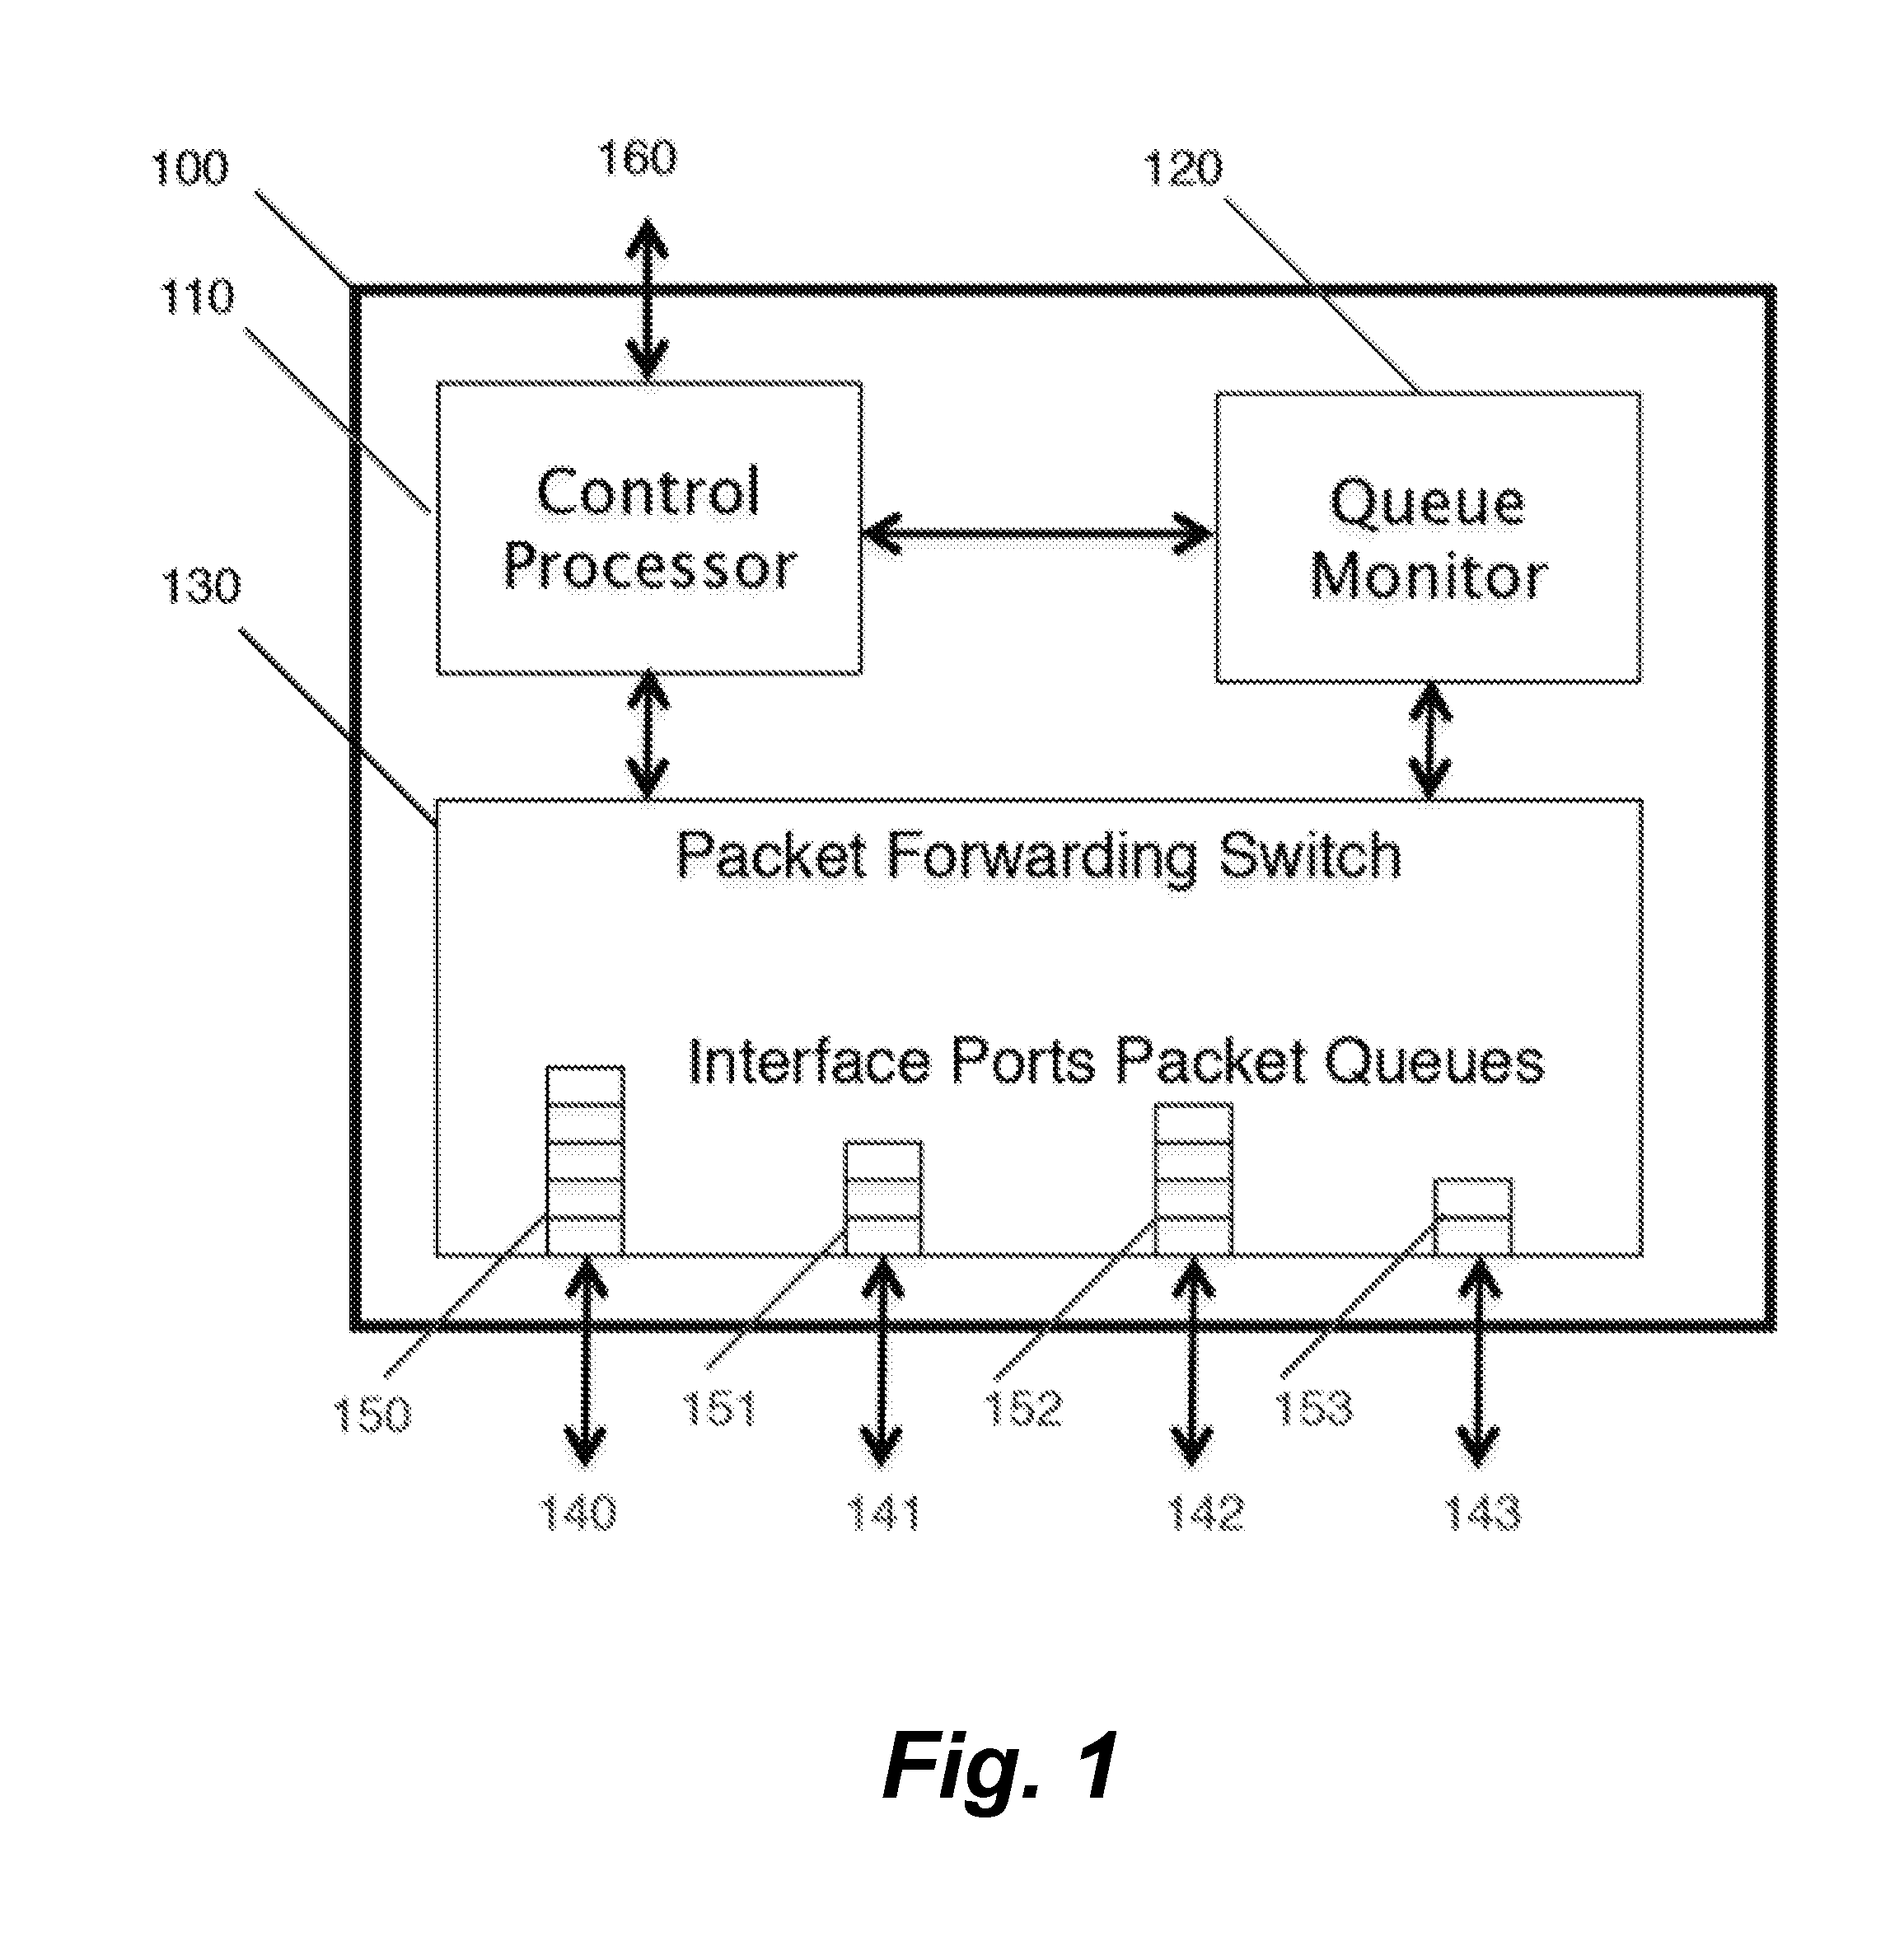 Latency Analysis of Traffic Passing Through an Ethernet Switch